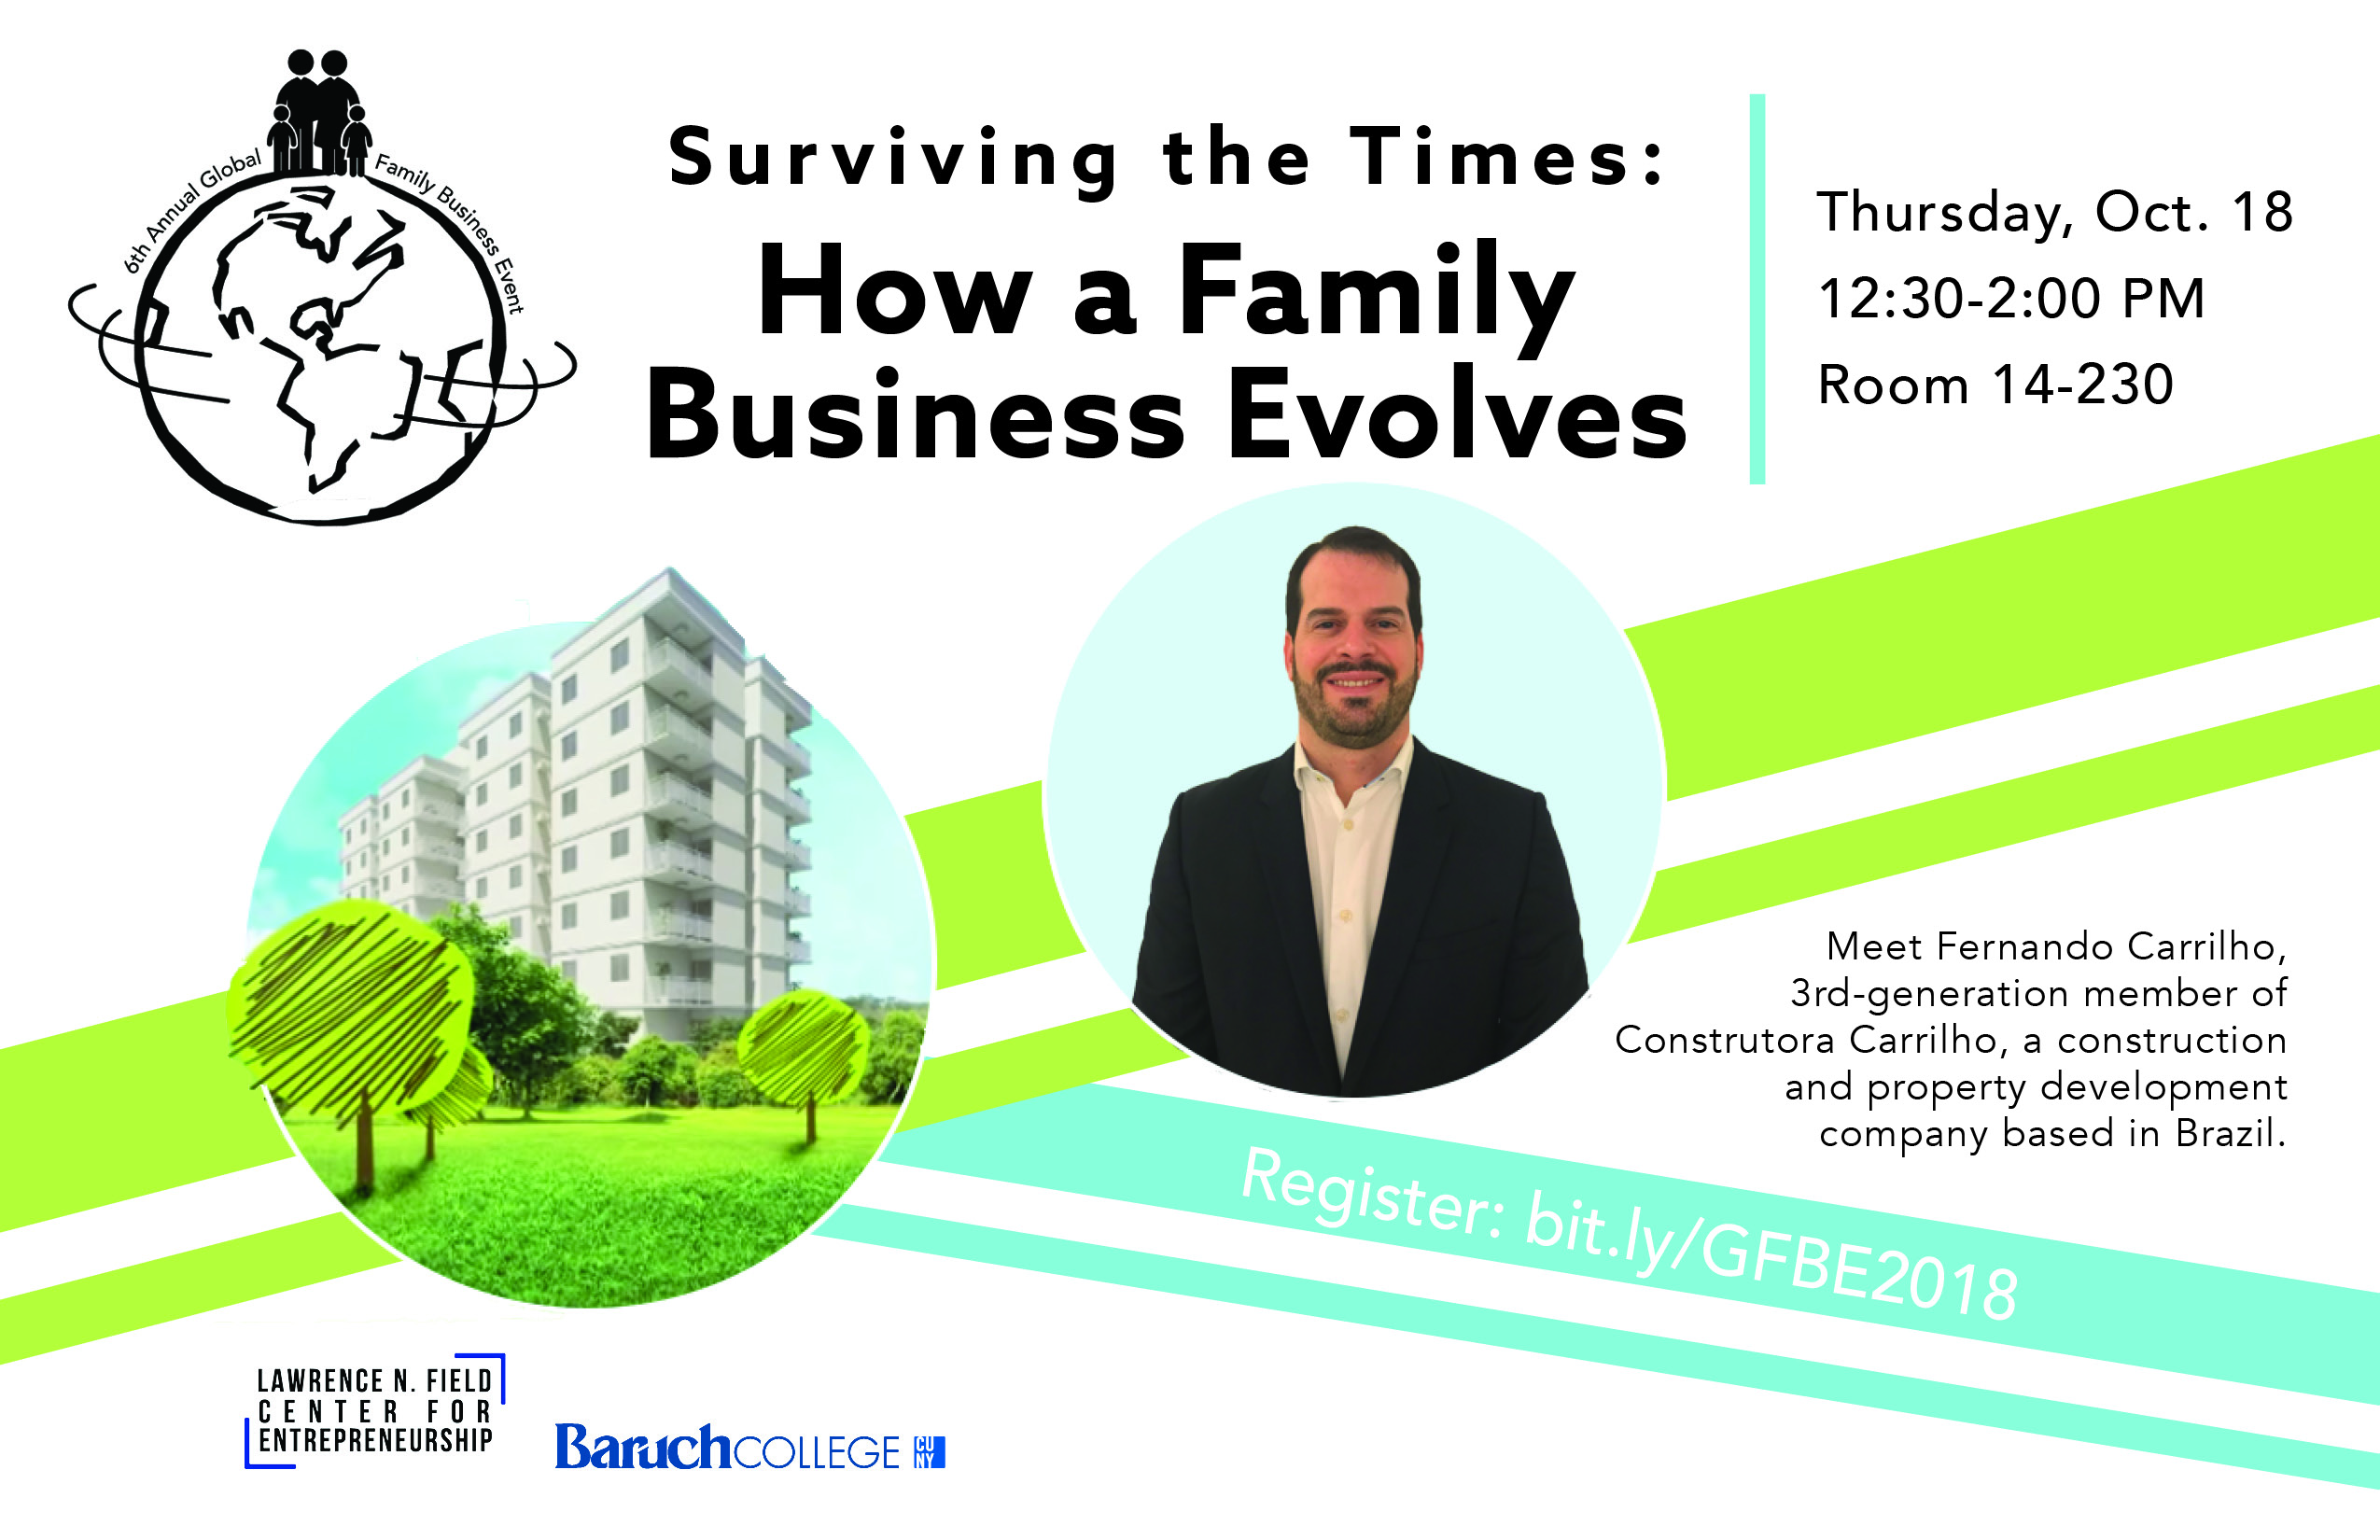 Global Family Business Event - How a Family Business Evolves 